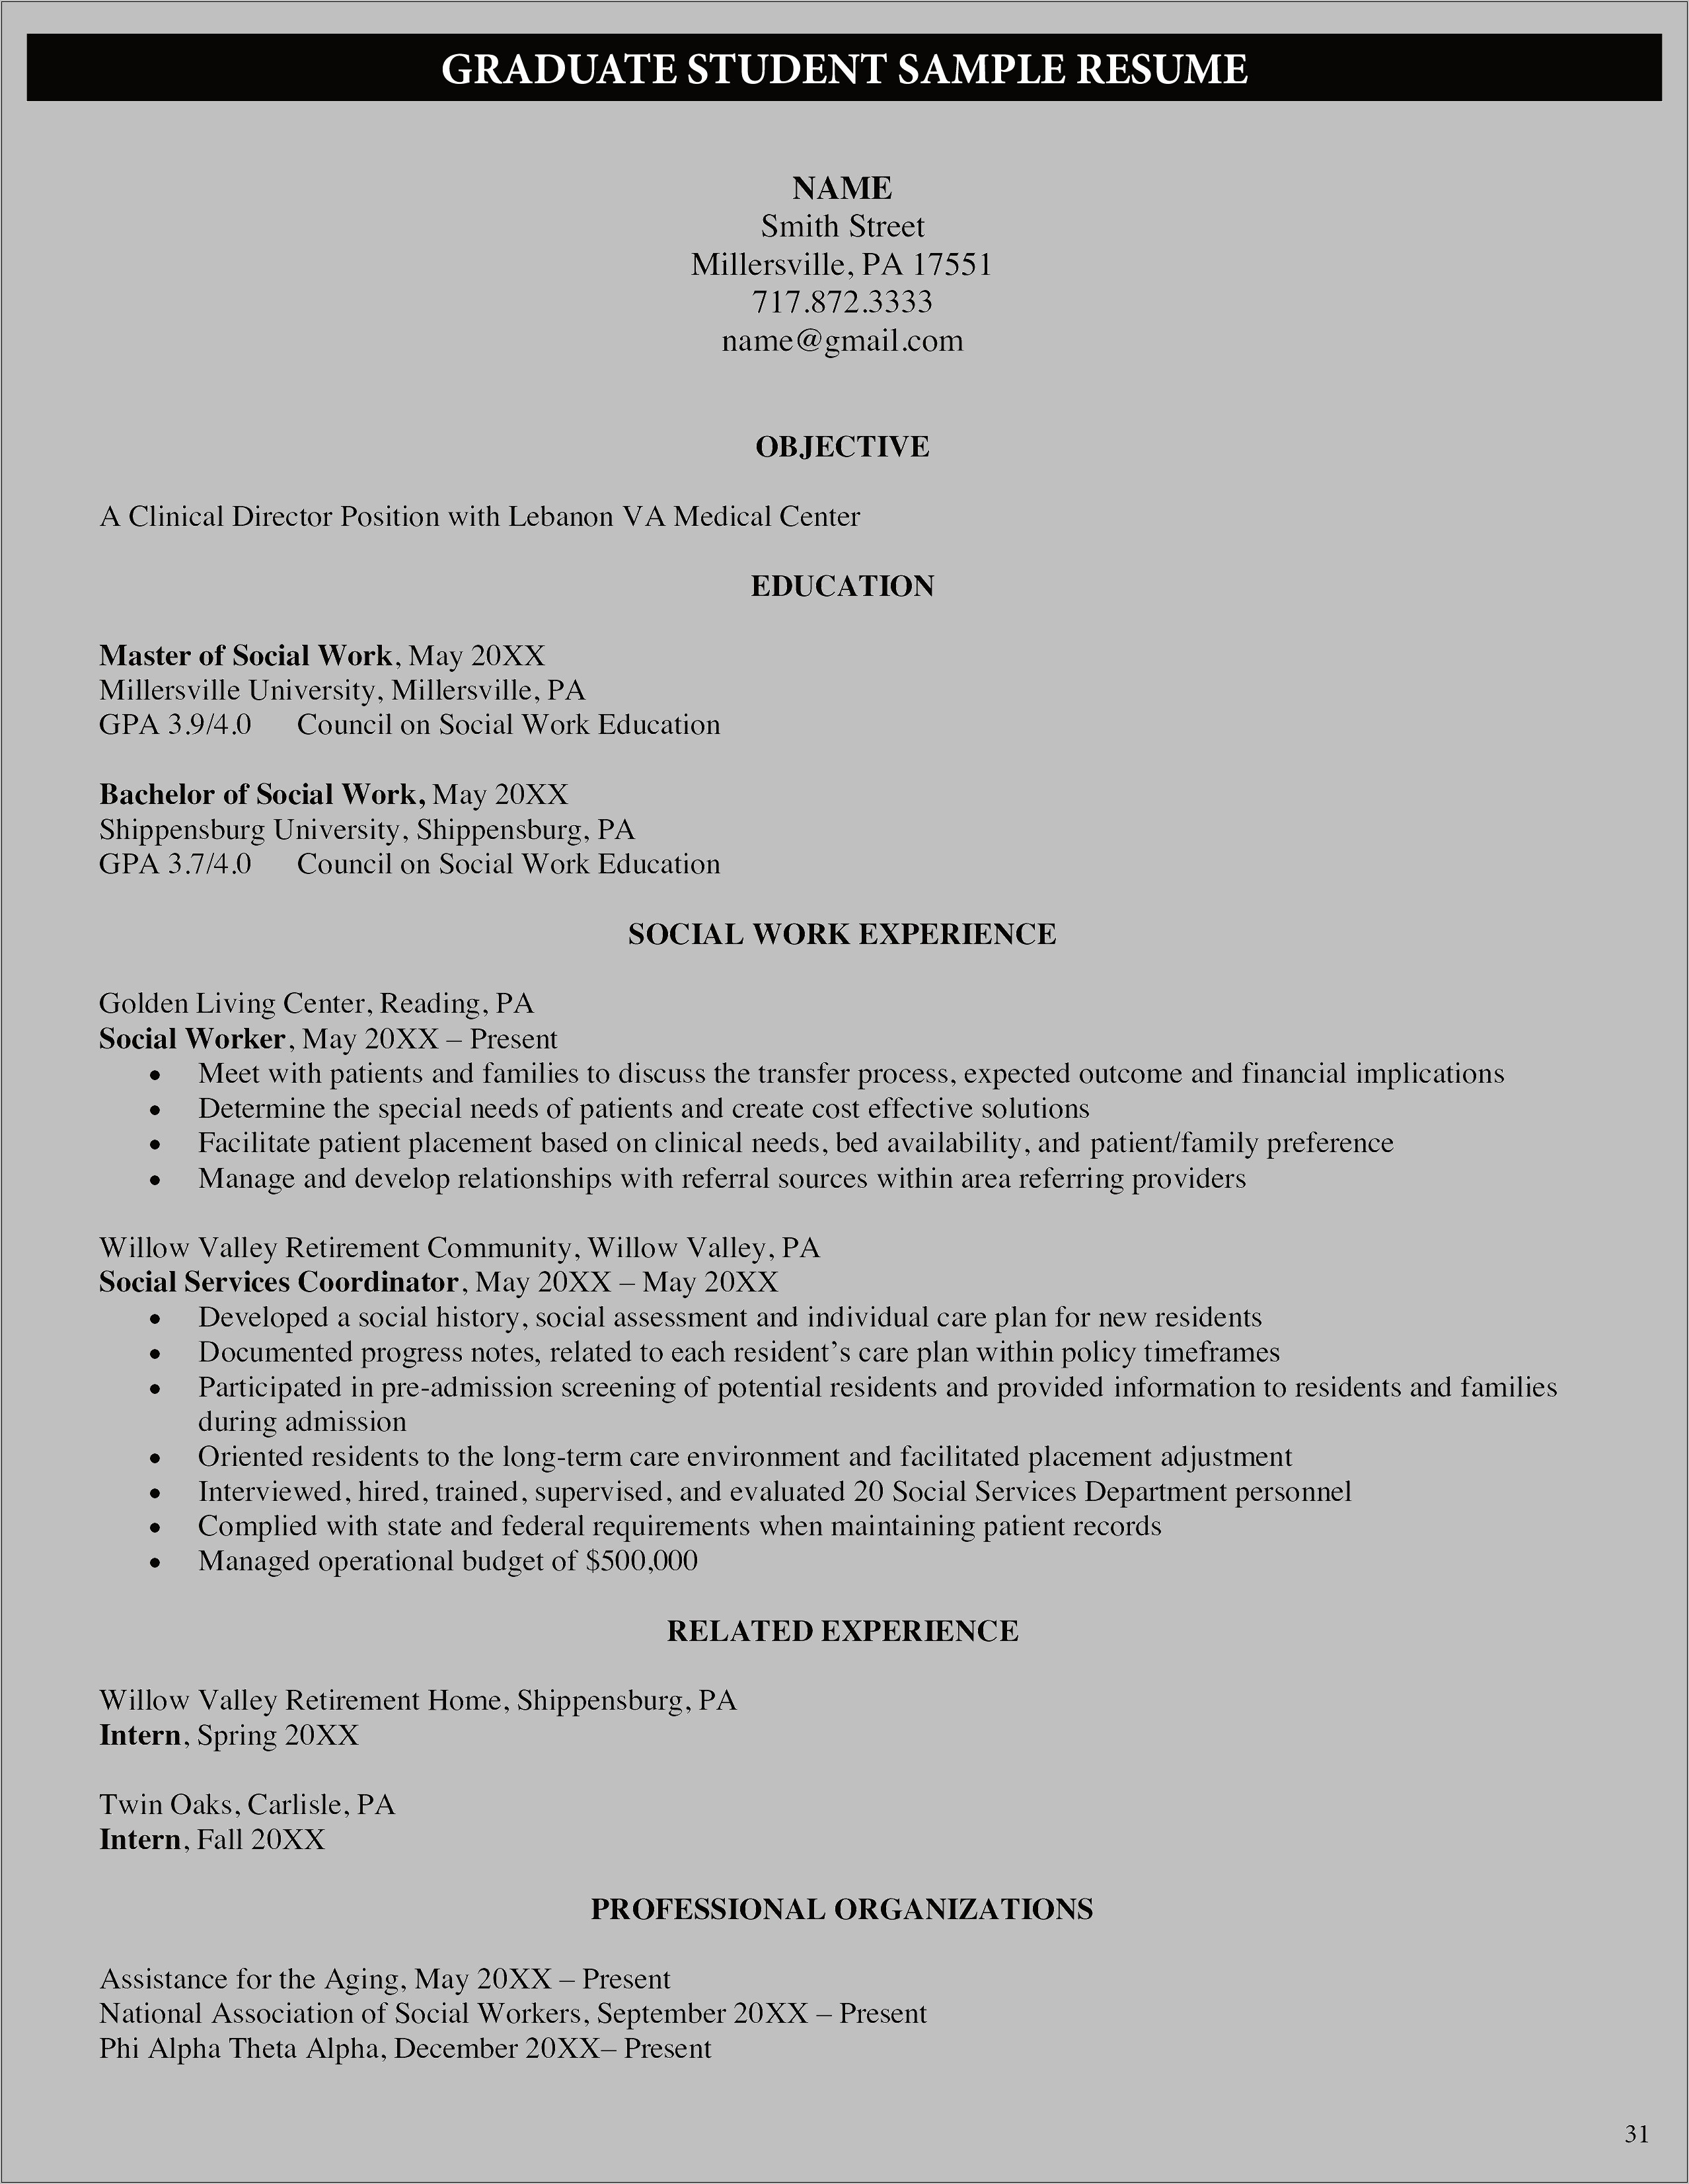 Resume Objectives Medical Social Work Examples